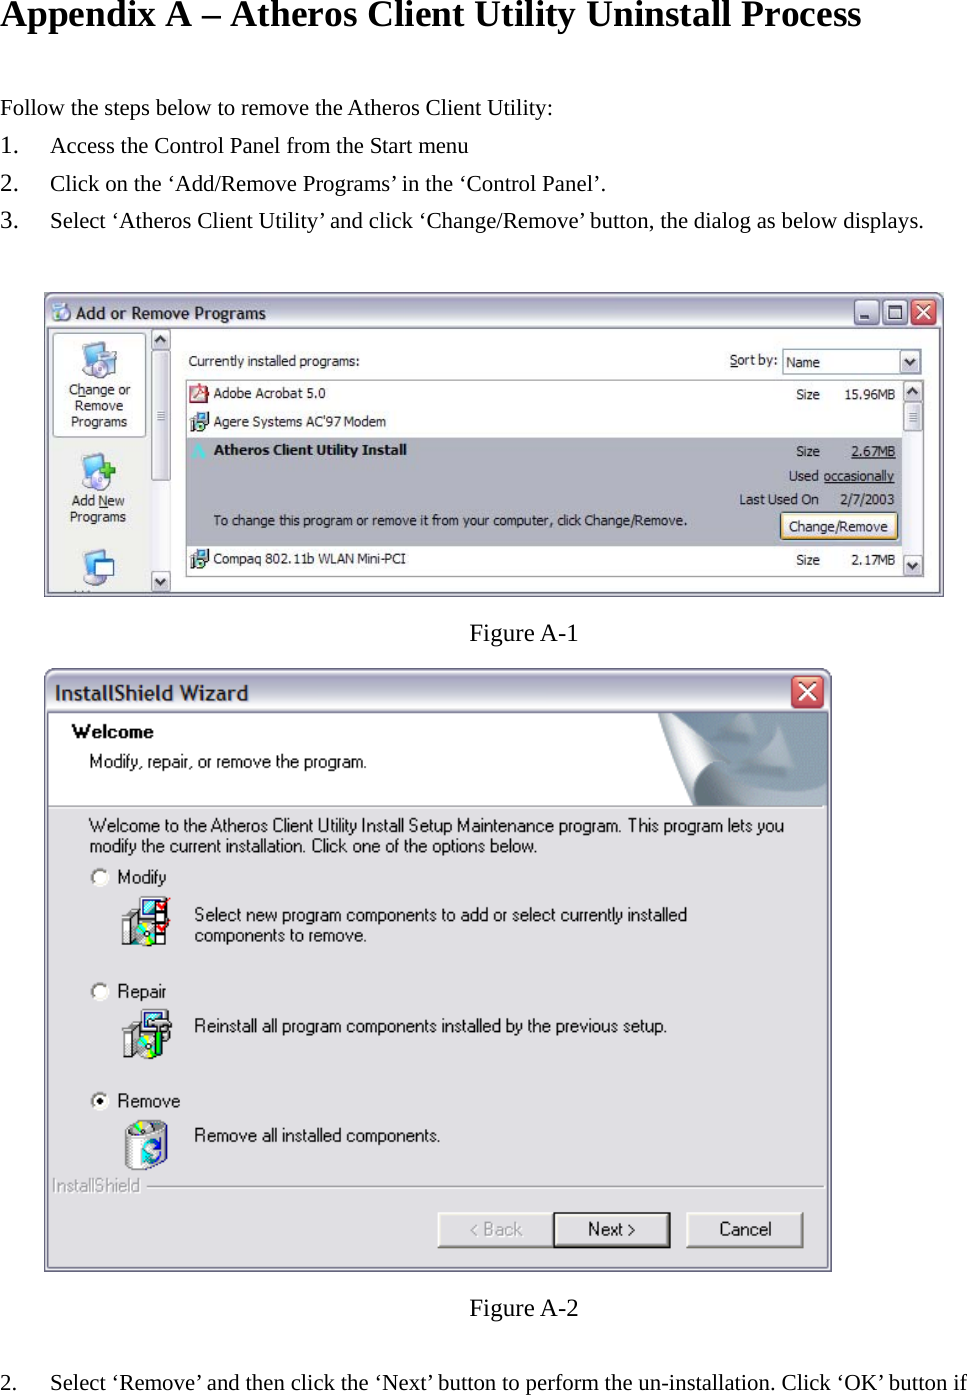 Appendix A – Atheros Client Utility Uninstall Process    Follow the steps below to remove the Atheros Client Utility: 1.  Access the Control Panel from the Start menu 2.  Click on the ‘Add/Remove Programs’ in the ‘Control Panel’.   3.  Select ‘Atheros Client Utility’ and click ‘Change/Remove’ button, the dialog as below displays.   Figure A-1  Figure A-2  2.  Select ‘Remove’ and then click the ‘Next’ button to perform the un-installation. Click ‘OK’ button if 